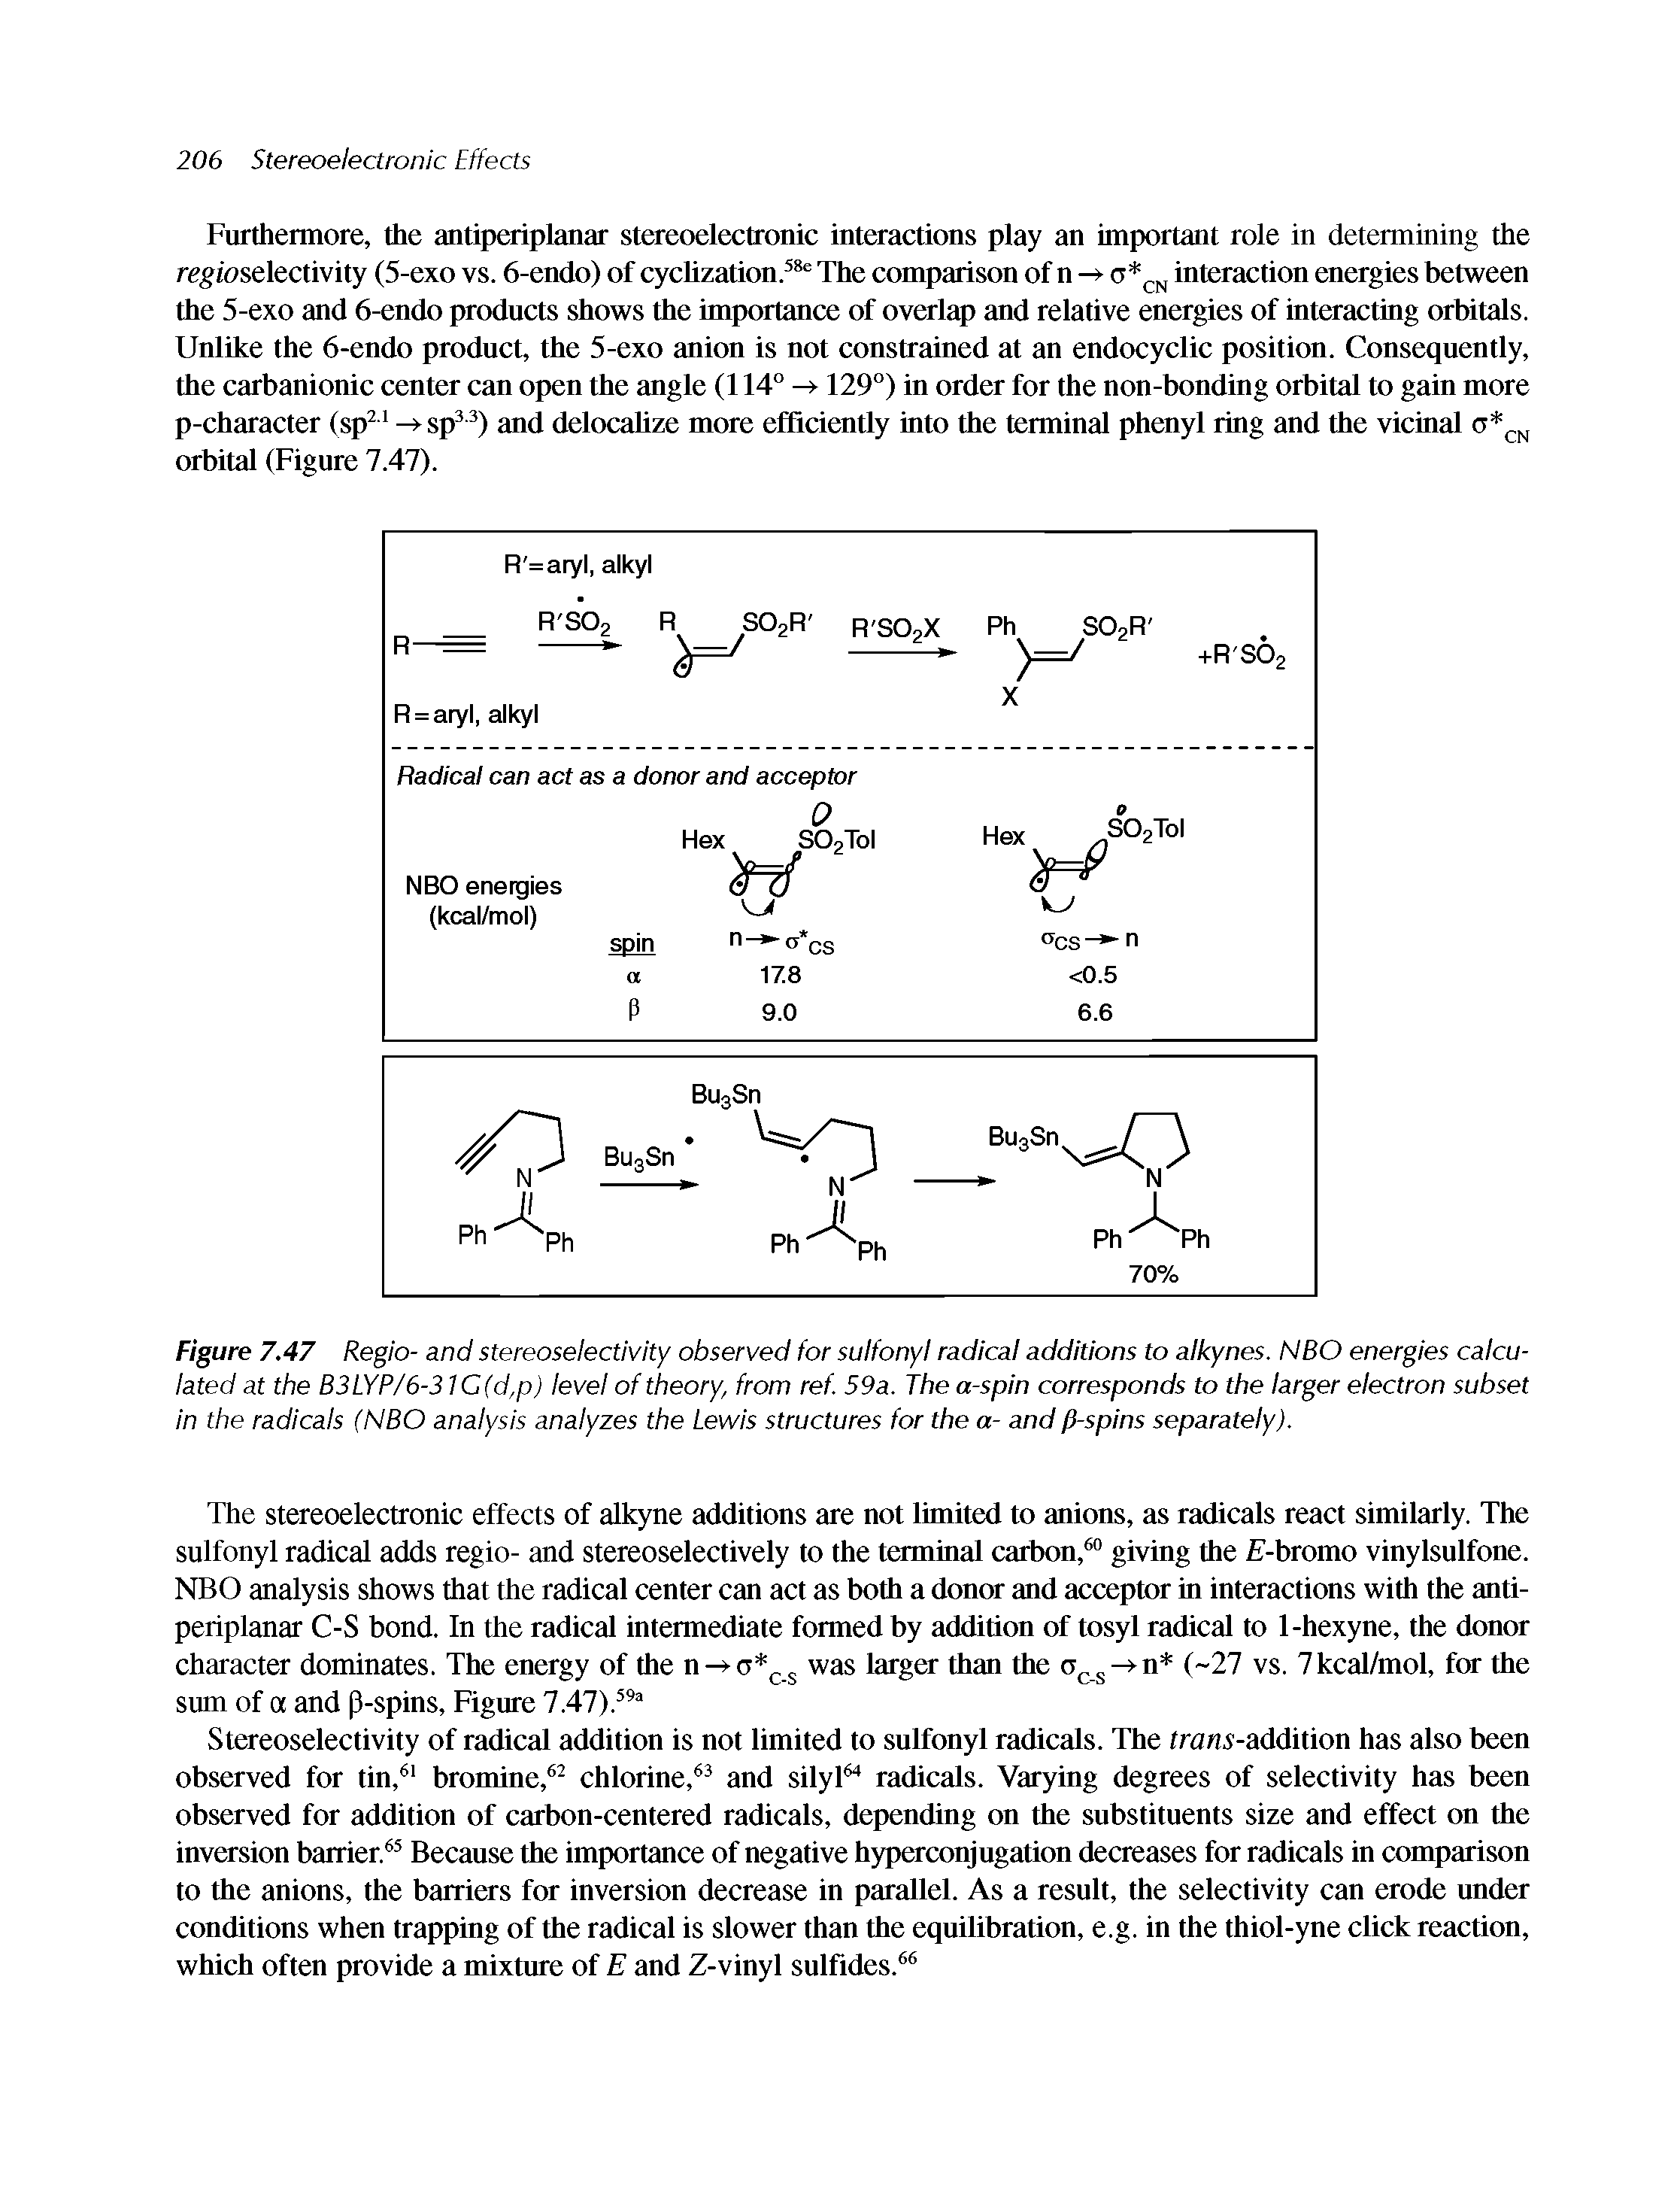 Figure 7.47 Regio- and stereoselectivity observed for sulfonyl radical additions to alkynes. NBO energies calculated at the B3LYP/6-31C(d,p) level of theory, from ref. 59a. The a-spin corresponds to the larger electron subset in the radicals (NBO analysis analyzes the Lewis structures for the a- and fi-spins separately).